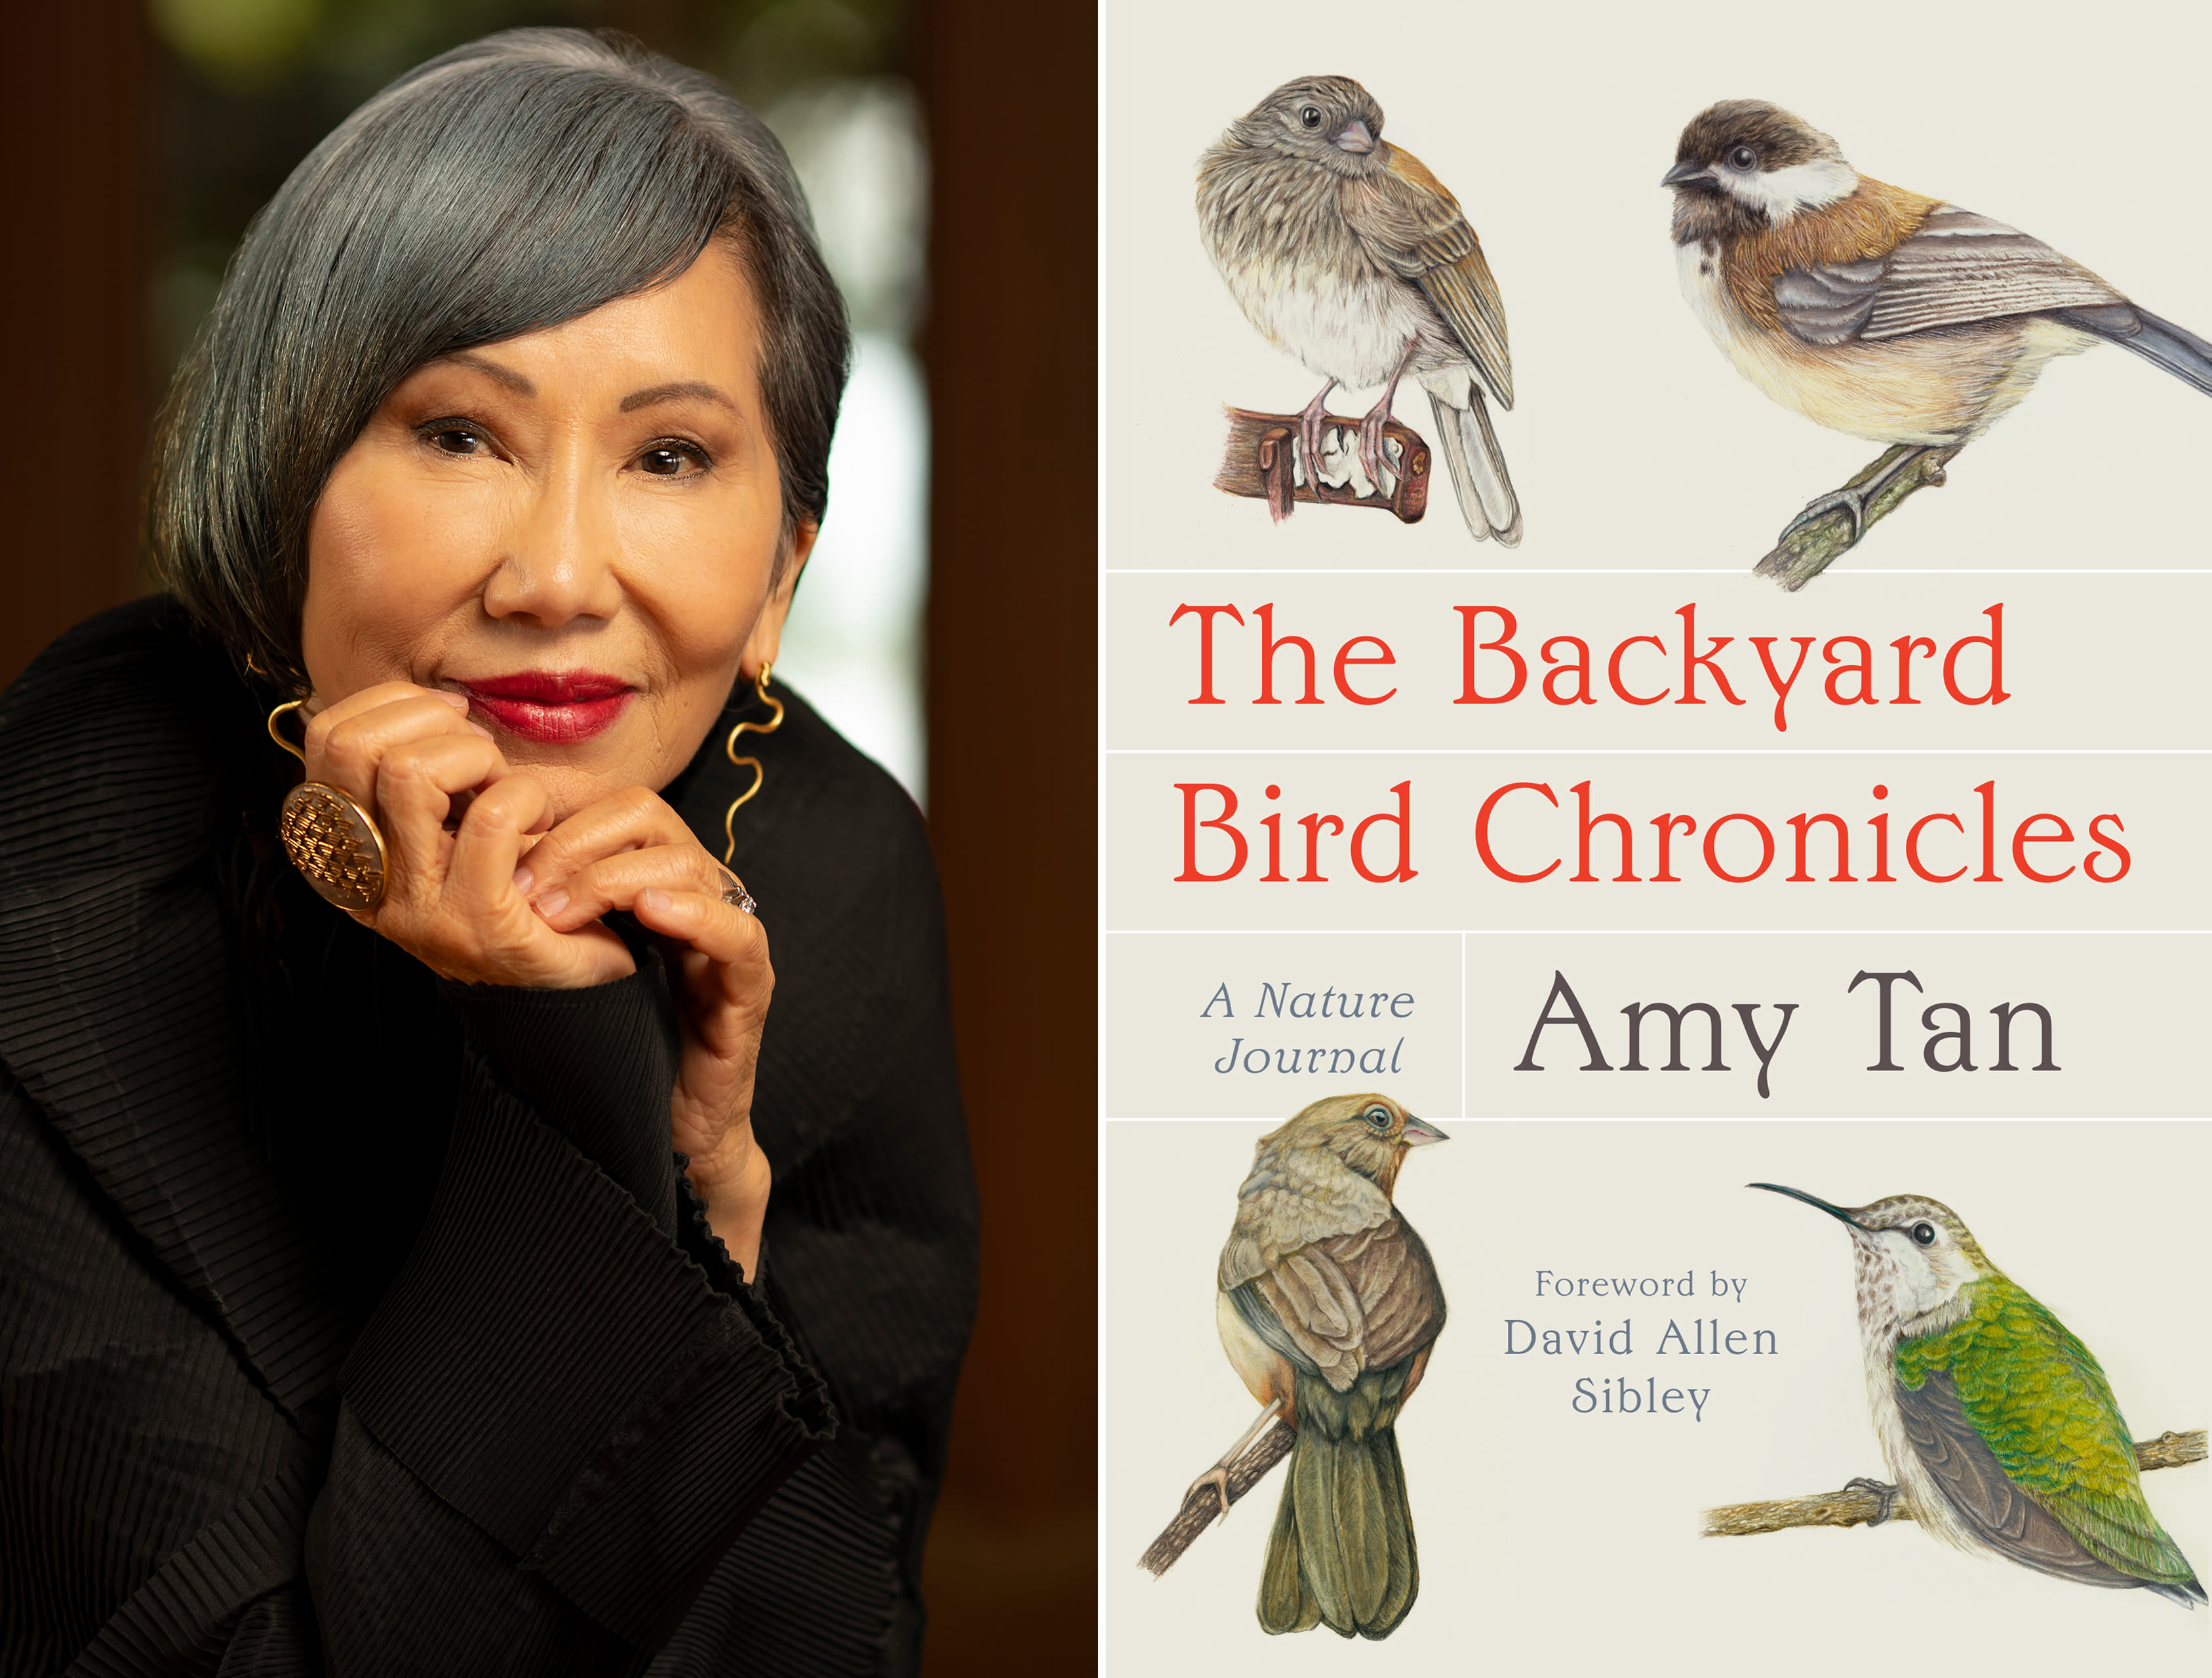 ‘A sense of calm’: Amy Tan’s writing and illustrations soar in new book about birds